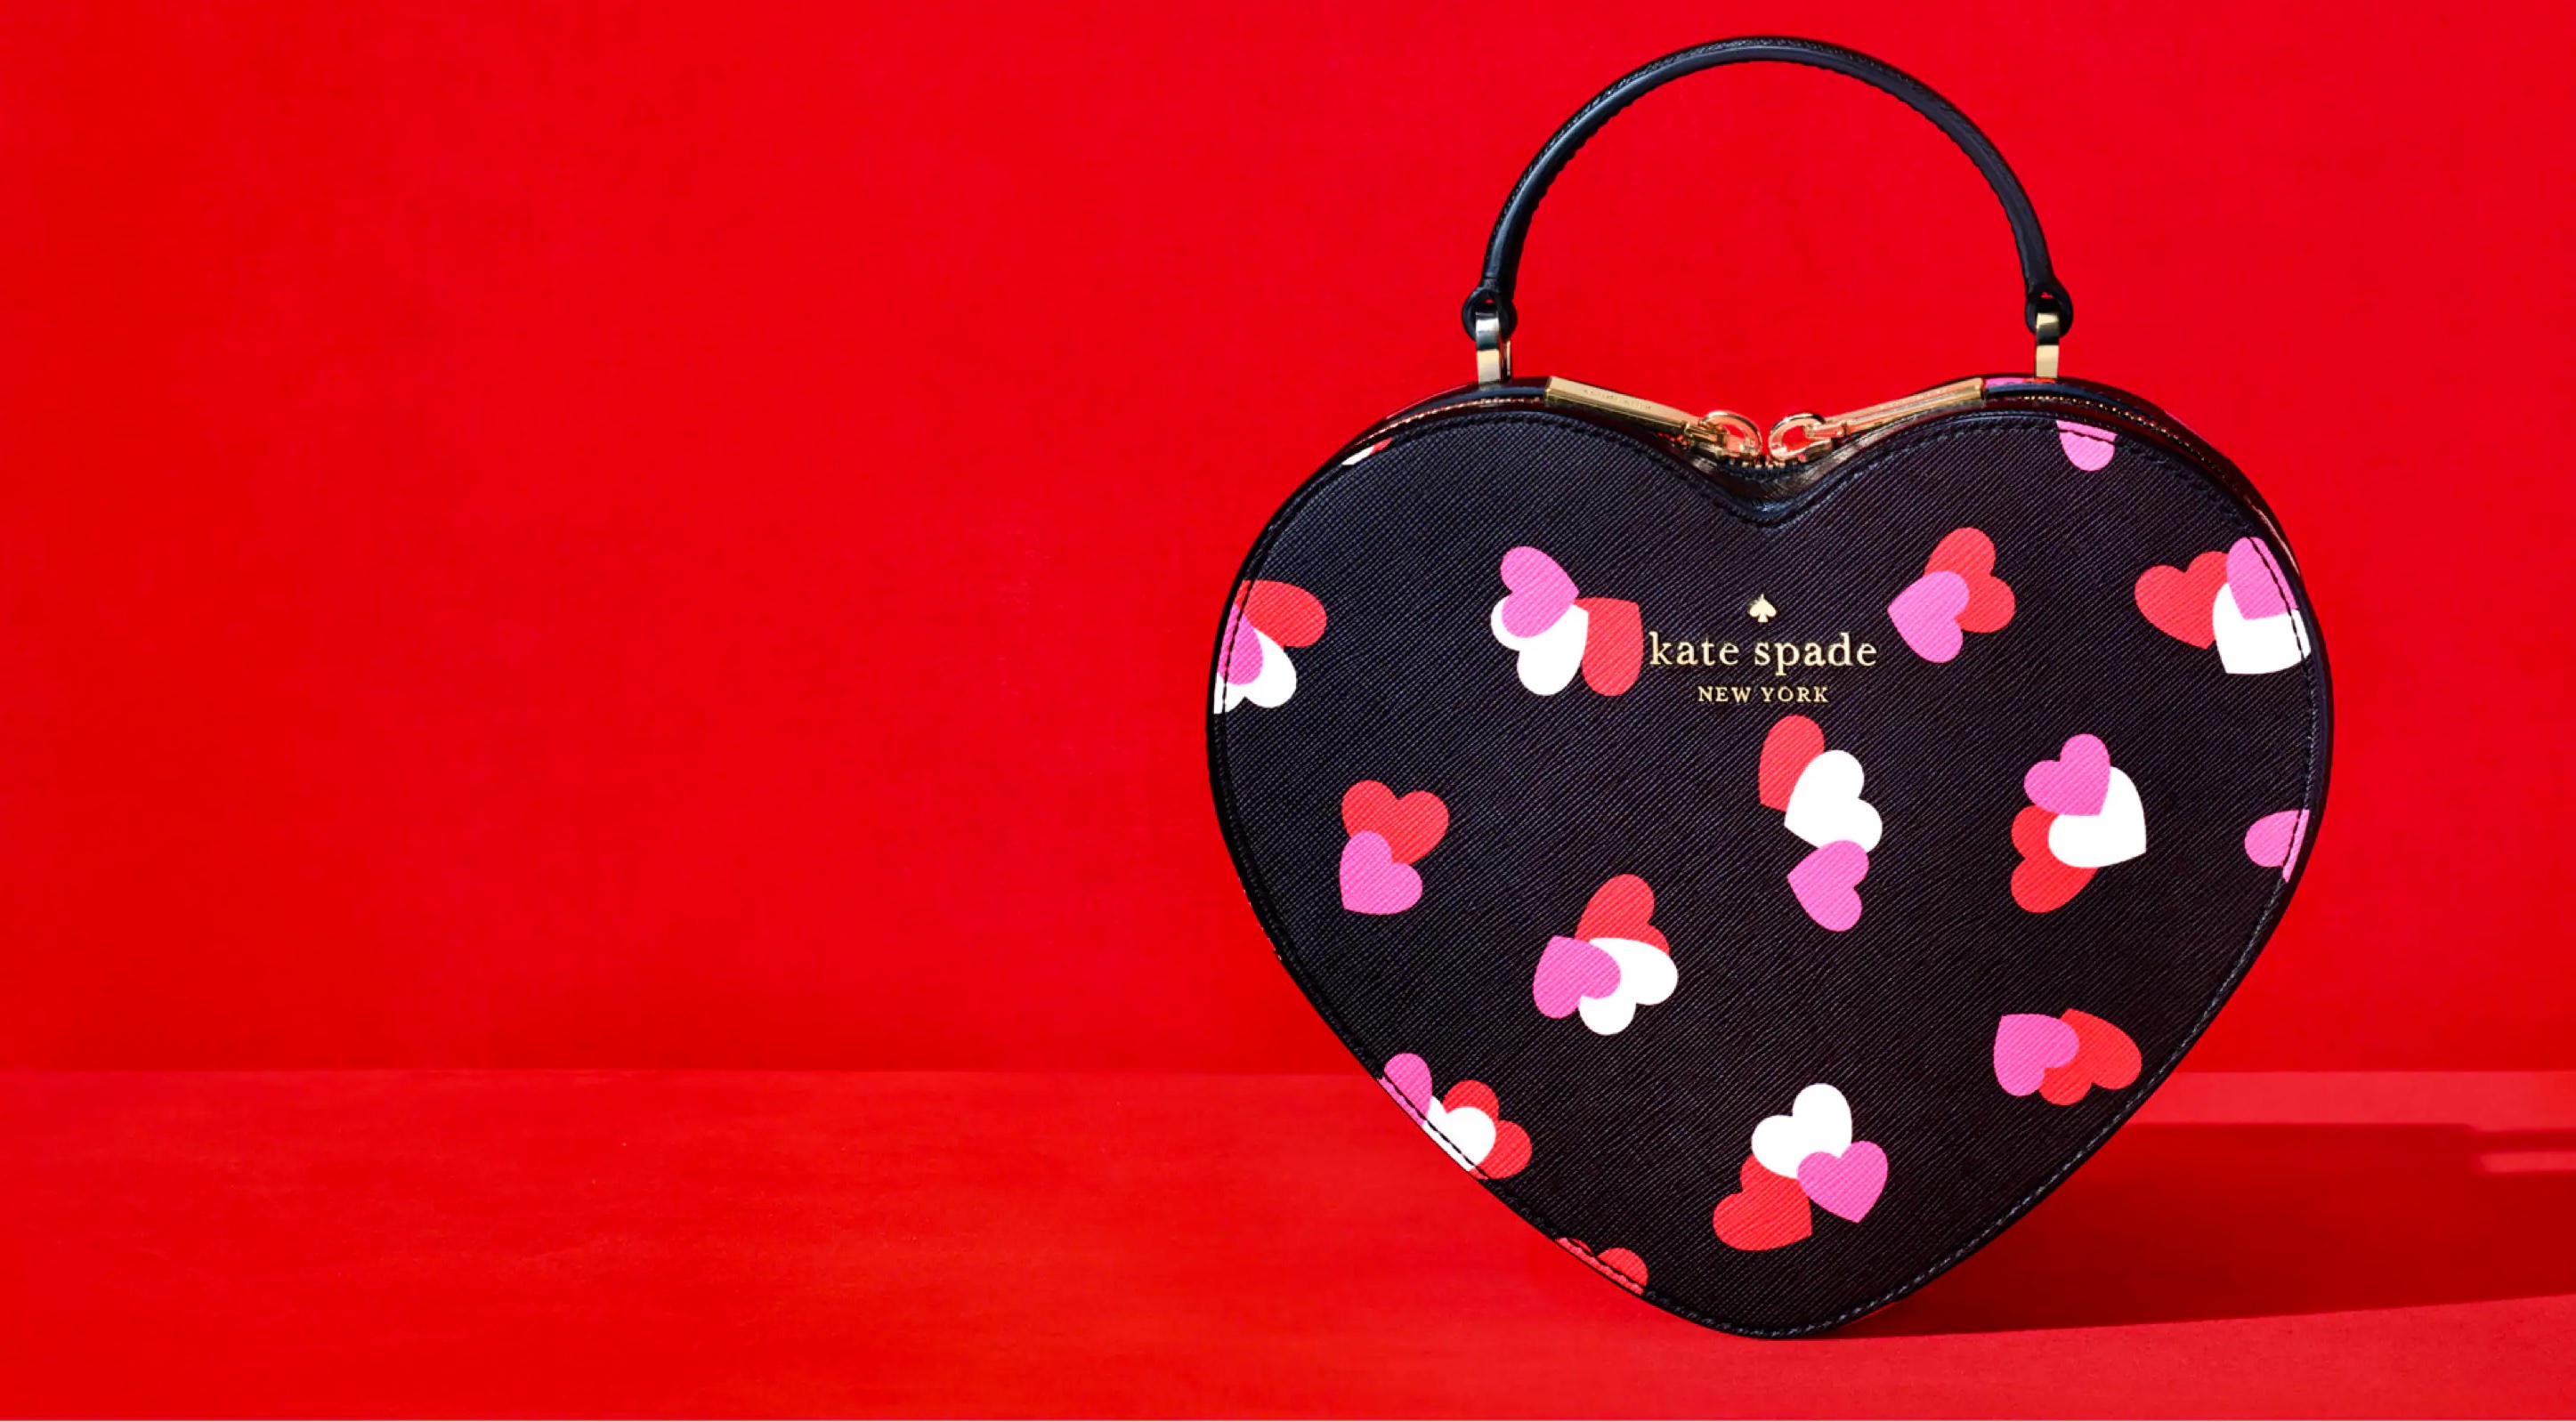 Kate Spade Surprise Sale offers up to 75% off handbags, wallets, more for  Valentine's Day